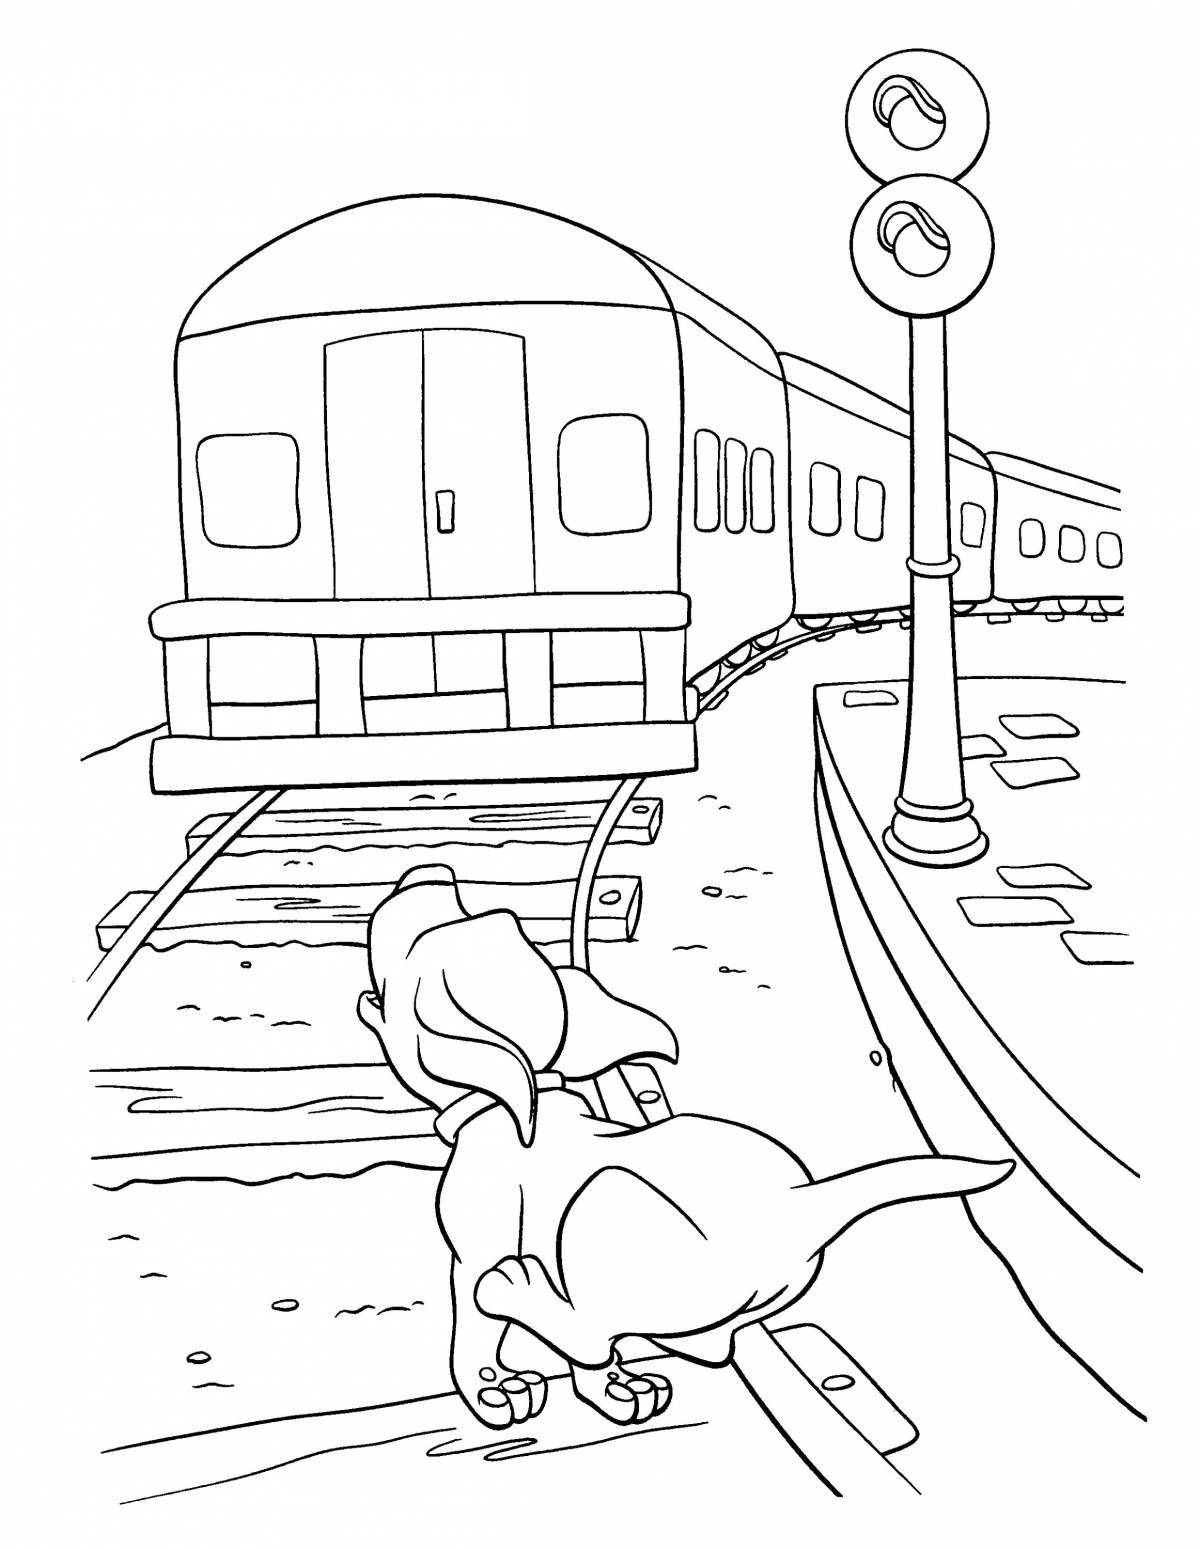 Charming rail safety page